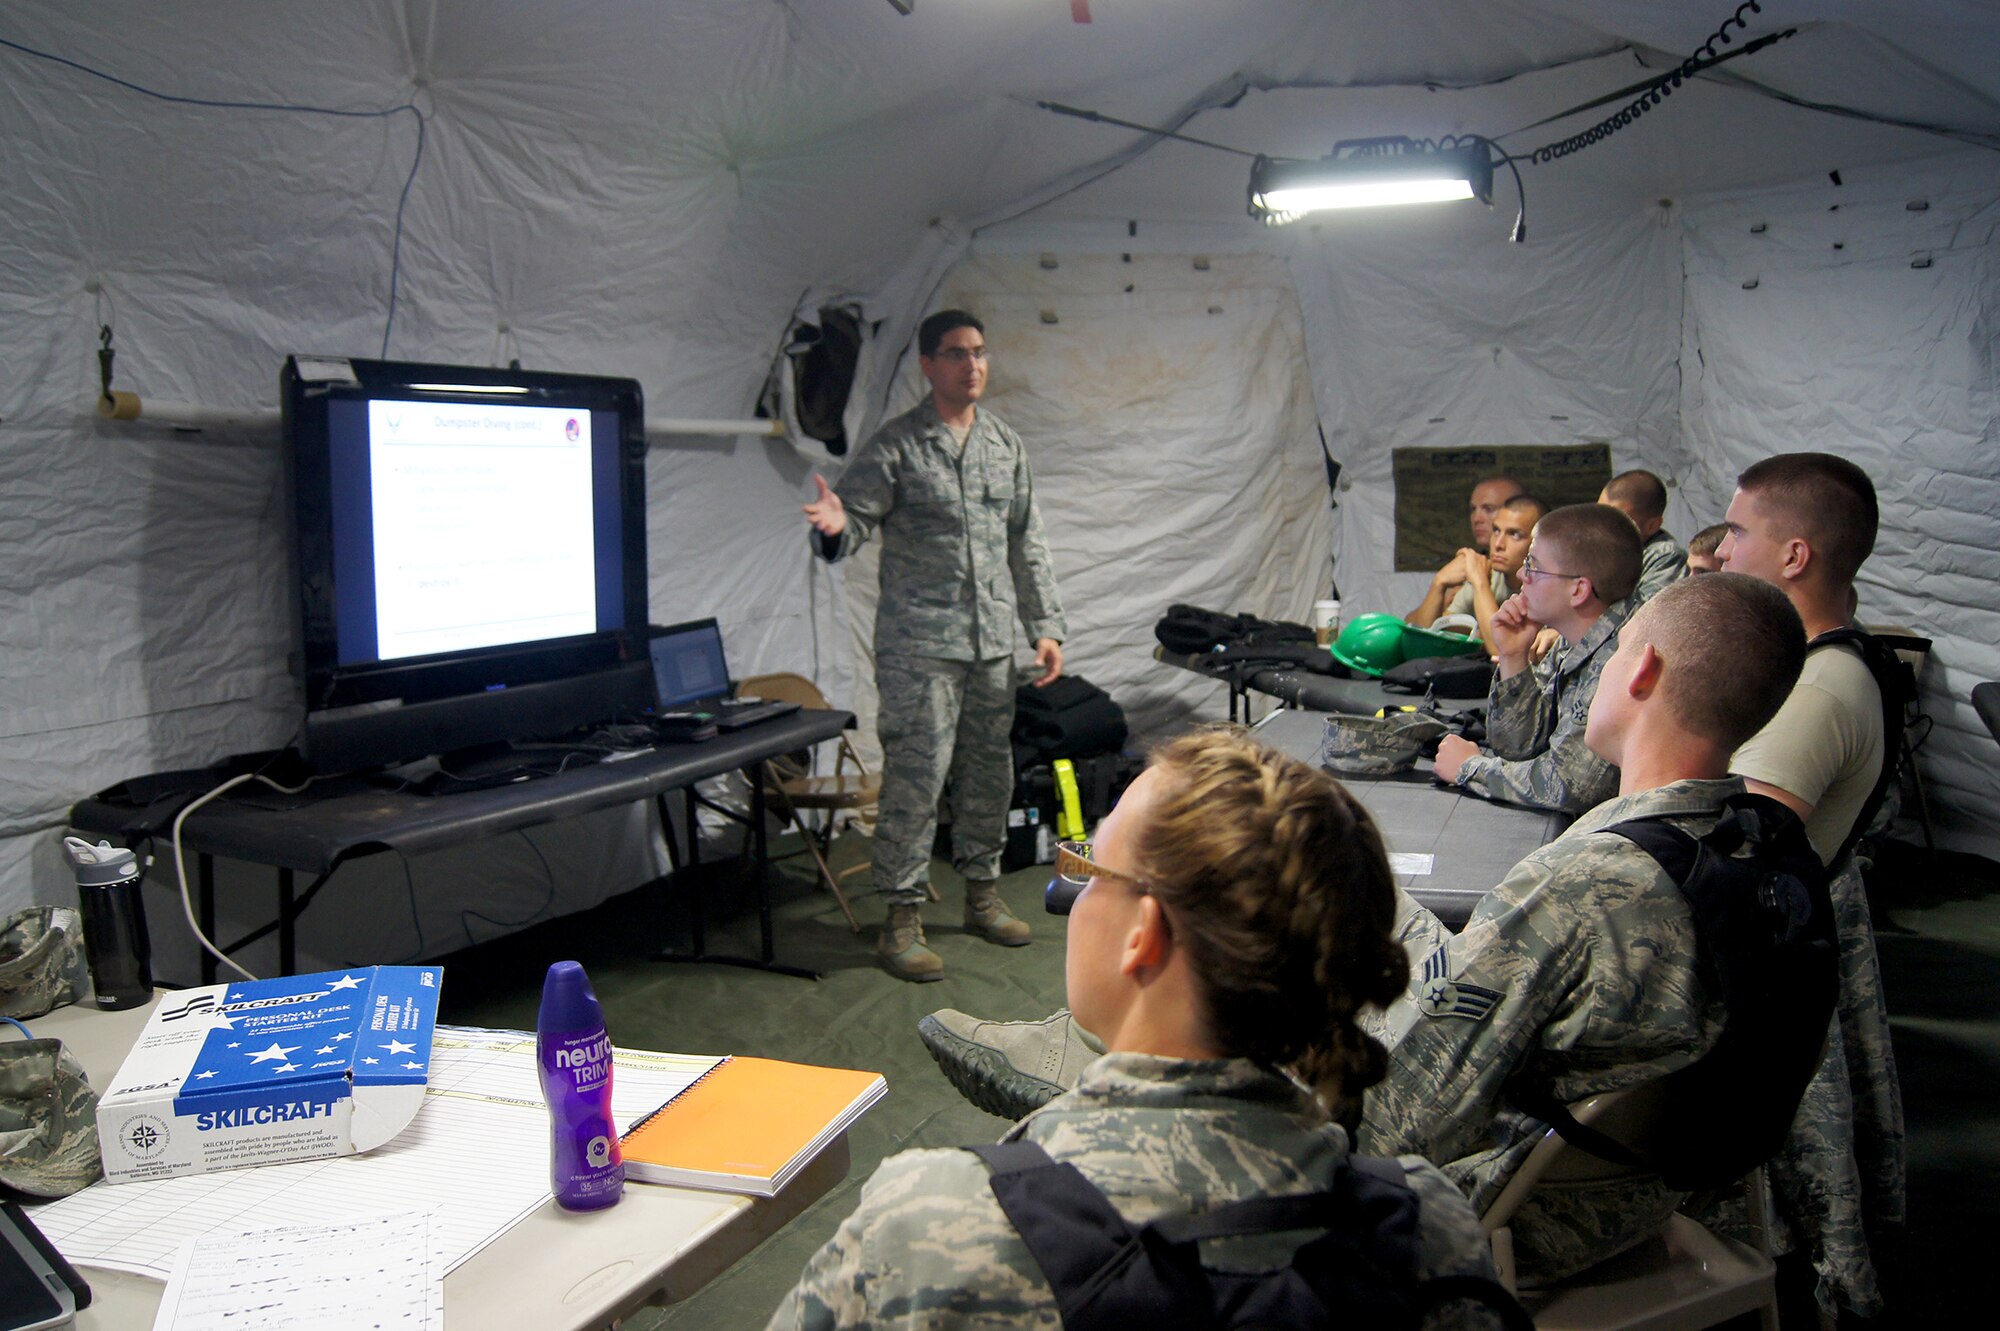 Members of the 35th Combat Communications Squadron, Tinker Air Force Base, Okla., hone their skill during a field training exercise at the Lackland AFB Media Annex in San Antonio, Texas. The 35th CBCS is one of four Reserve combat communications squadrons each located in separate regions of the country that provide theater-deployable communications during wartime and contingency operations or humanitarian missions in austere locations.